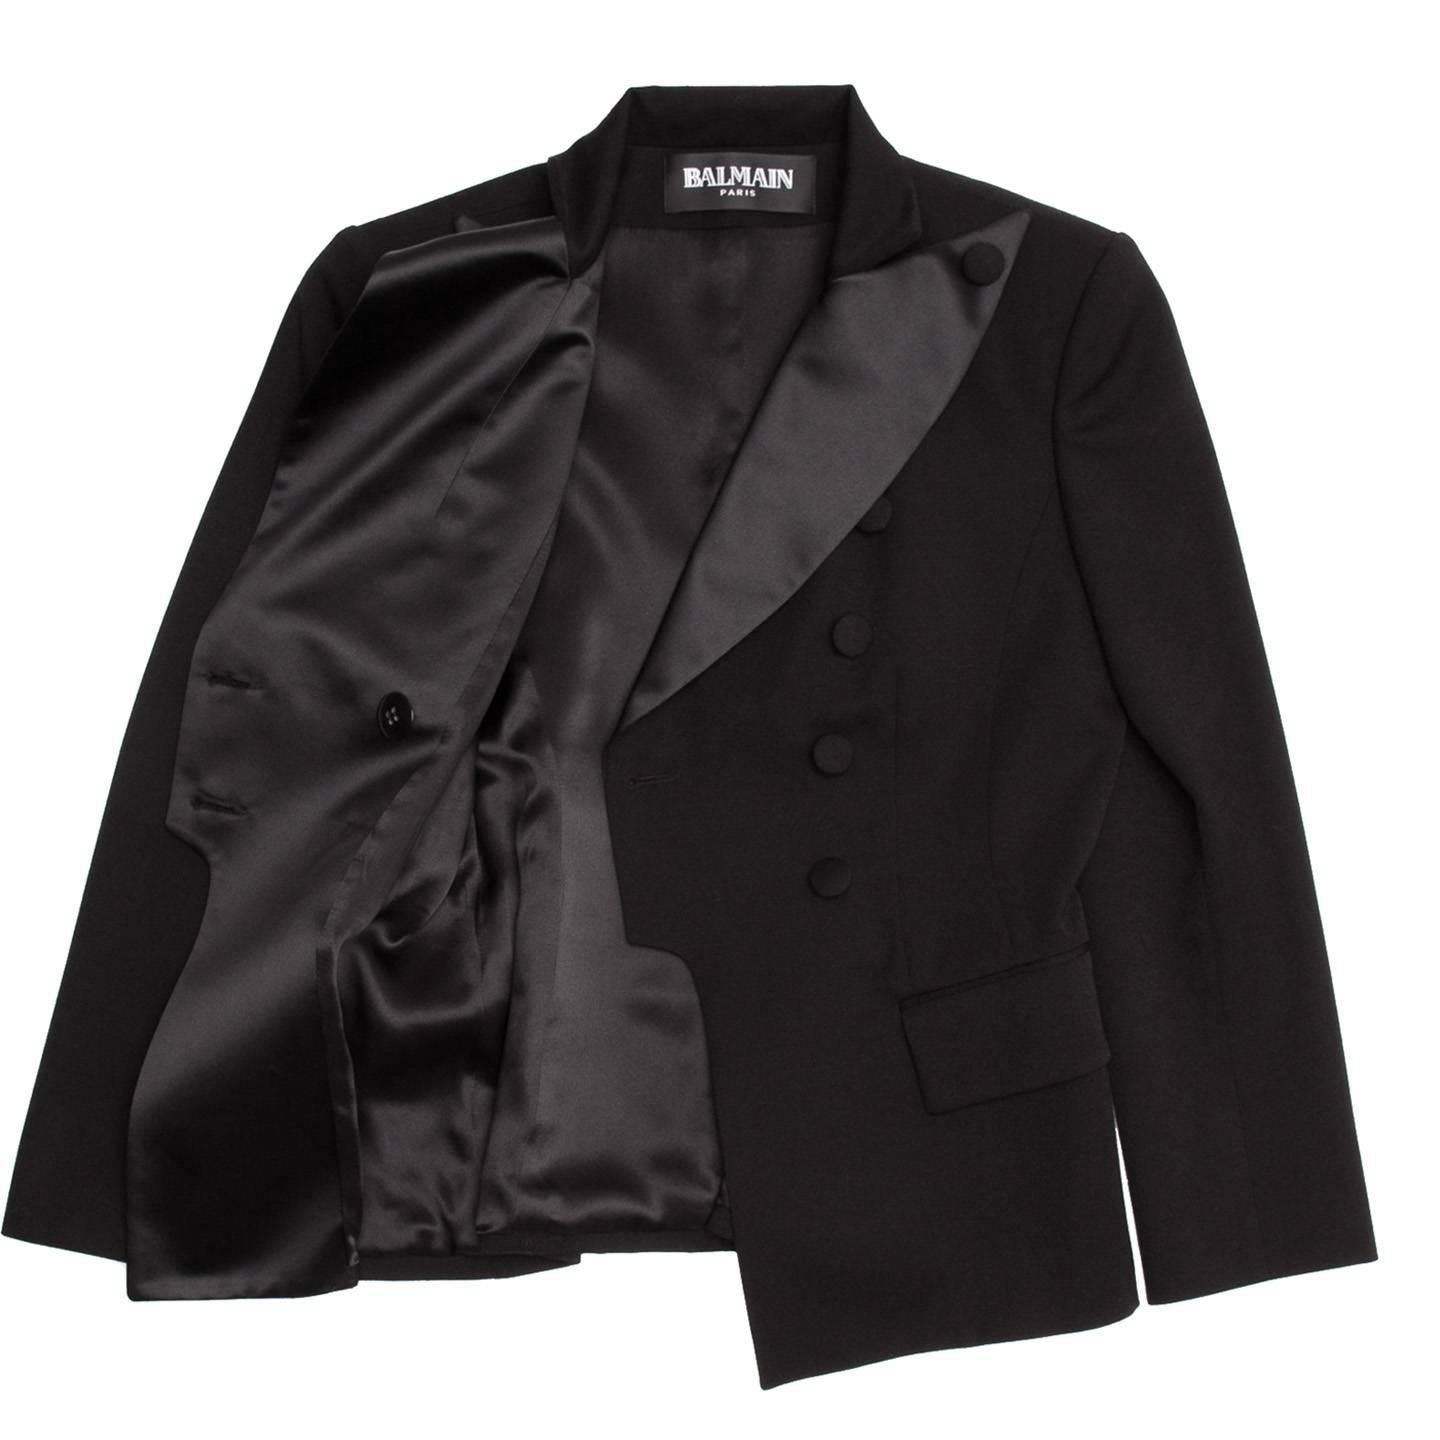 Balmain Black Wool Tuxedo Jacket In Excellent Condition For Sale In Brooklyn, NY